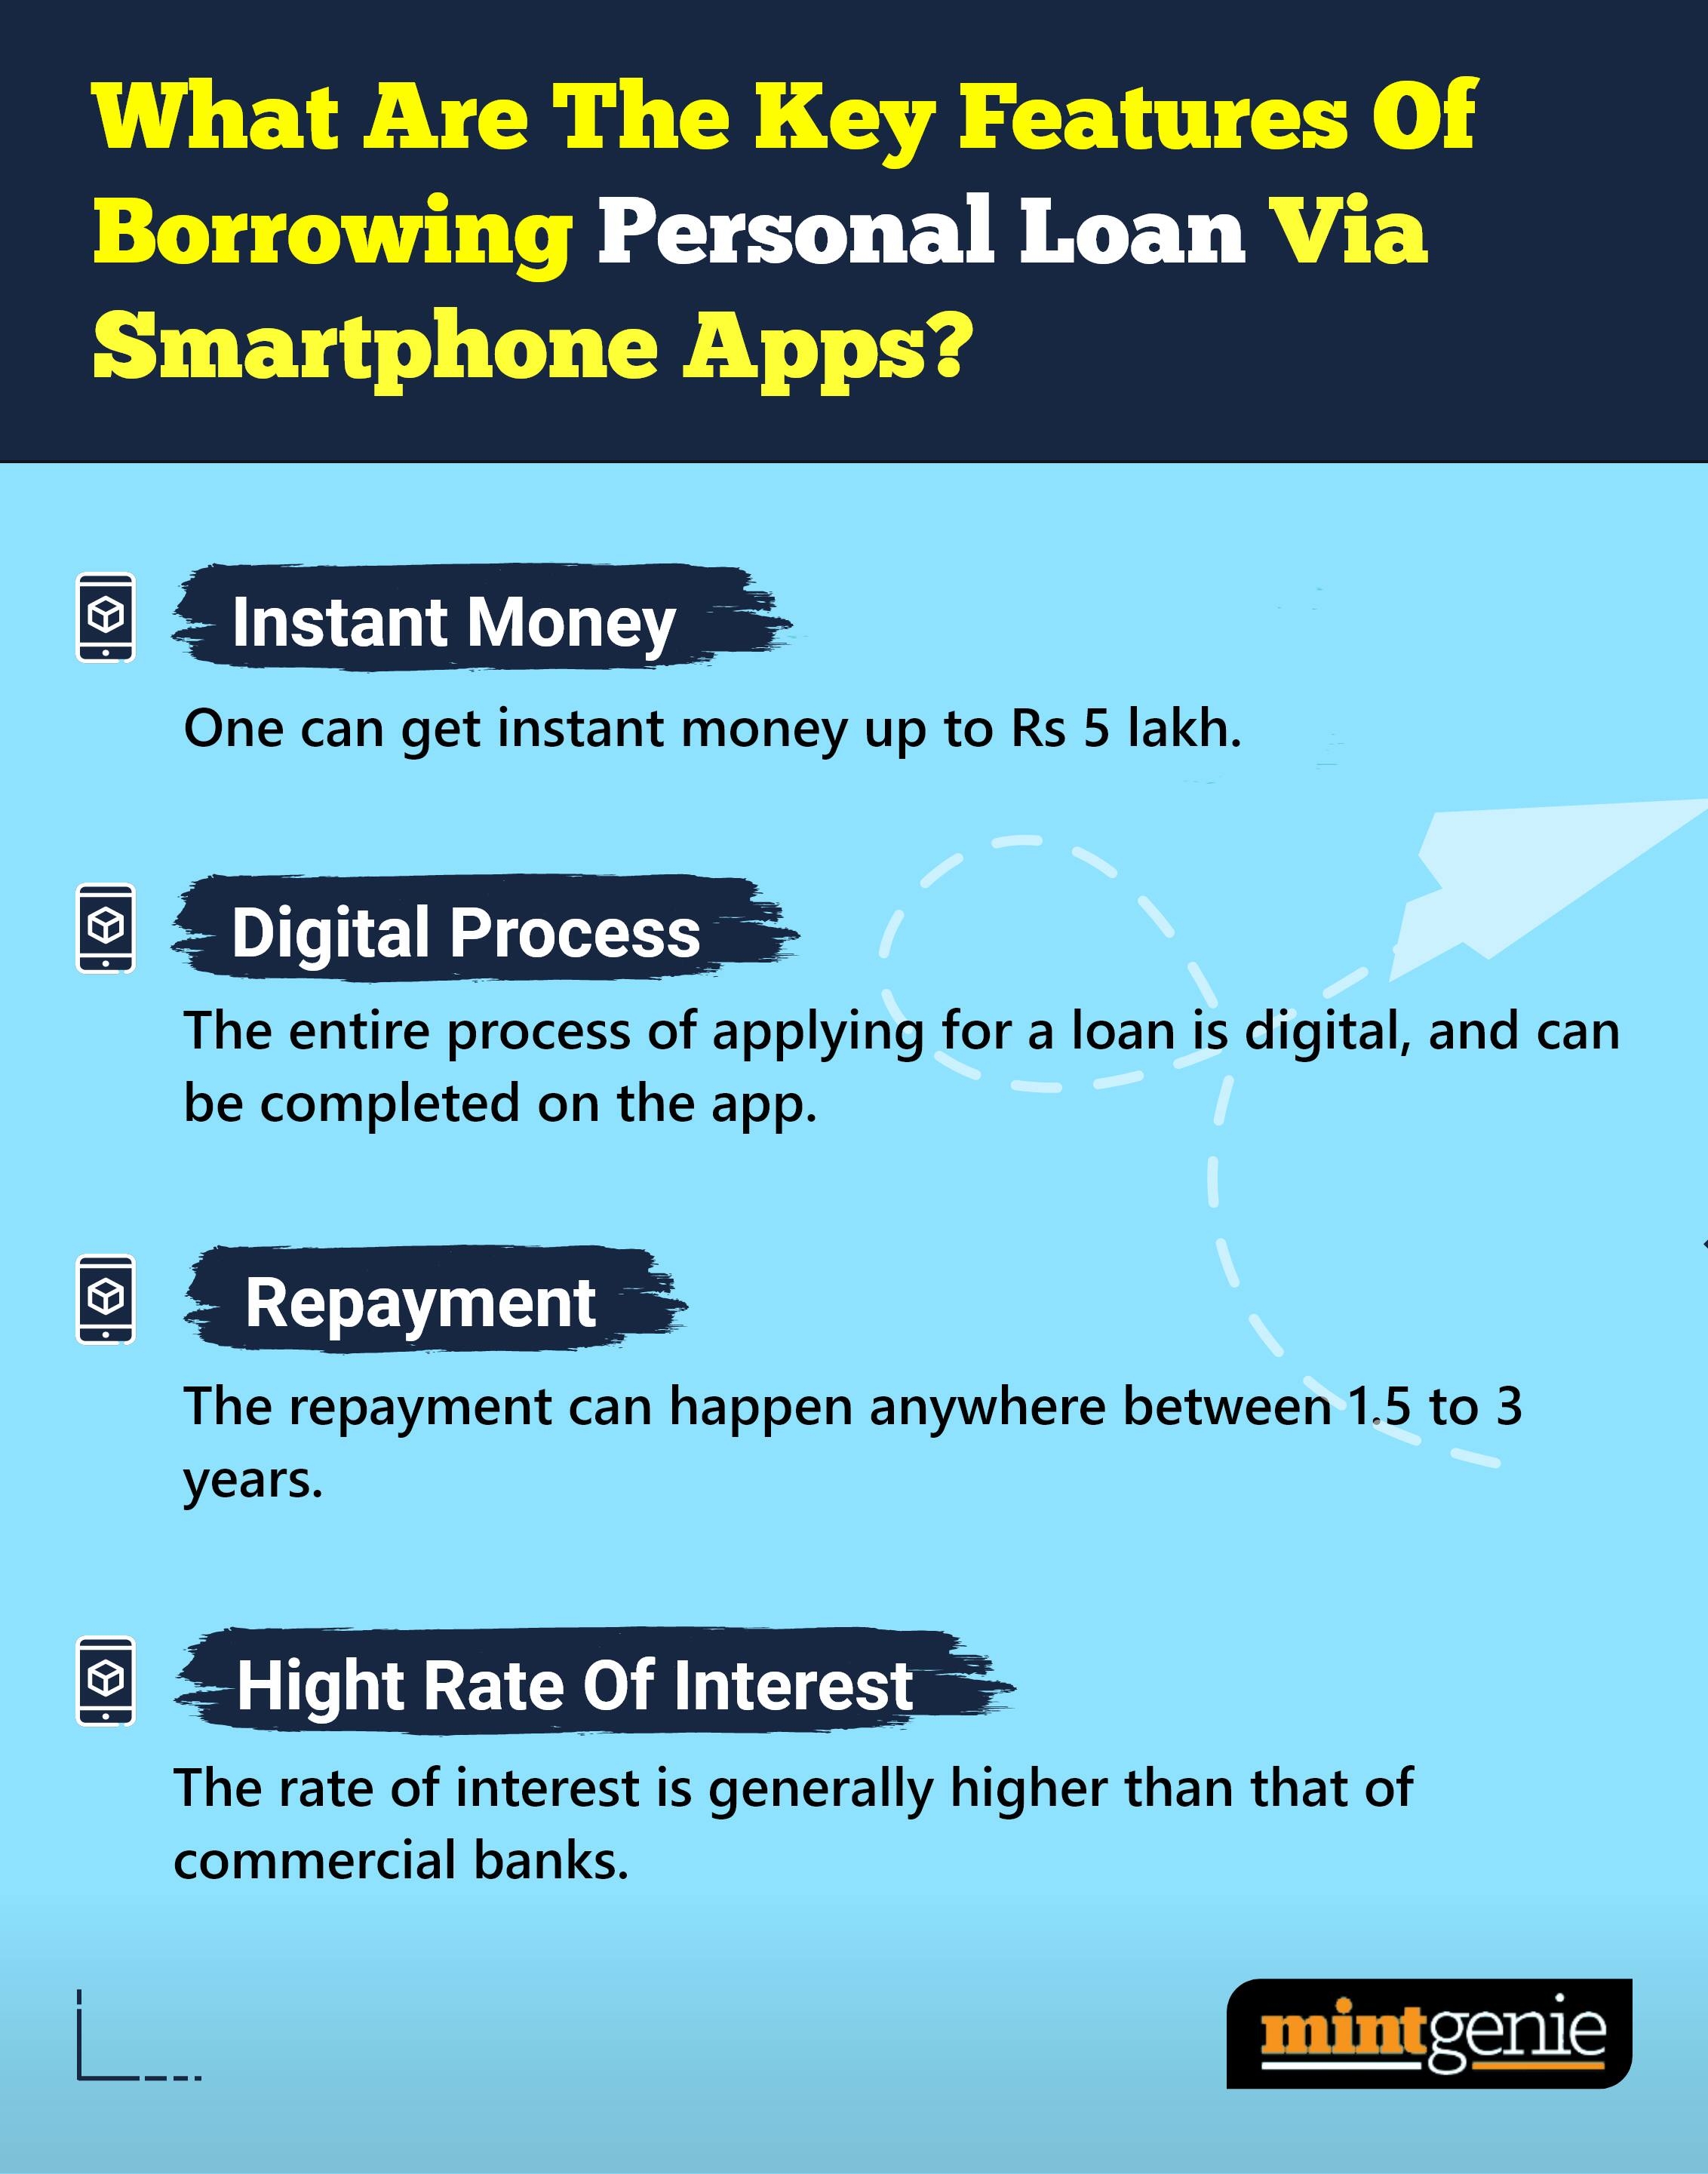 These are the key features of borrowing personal loan via smartphone apps.&nbsp;